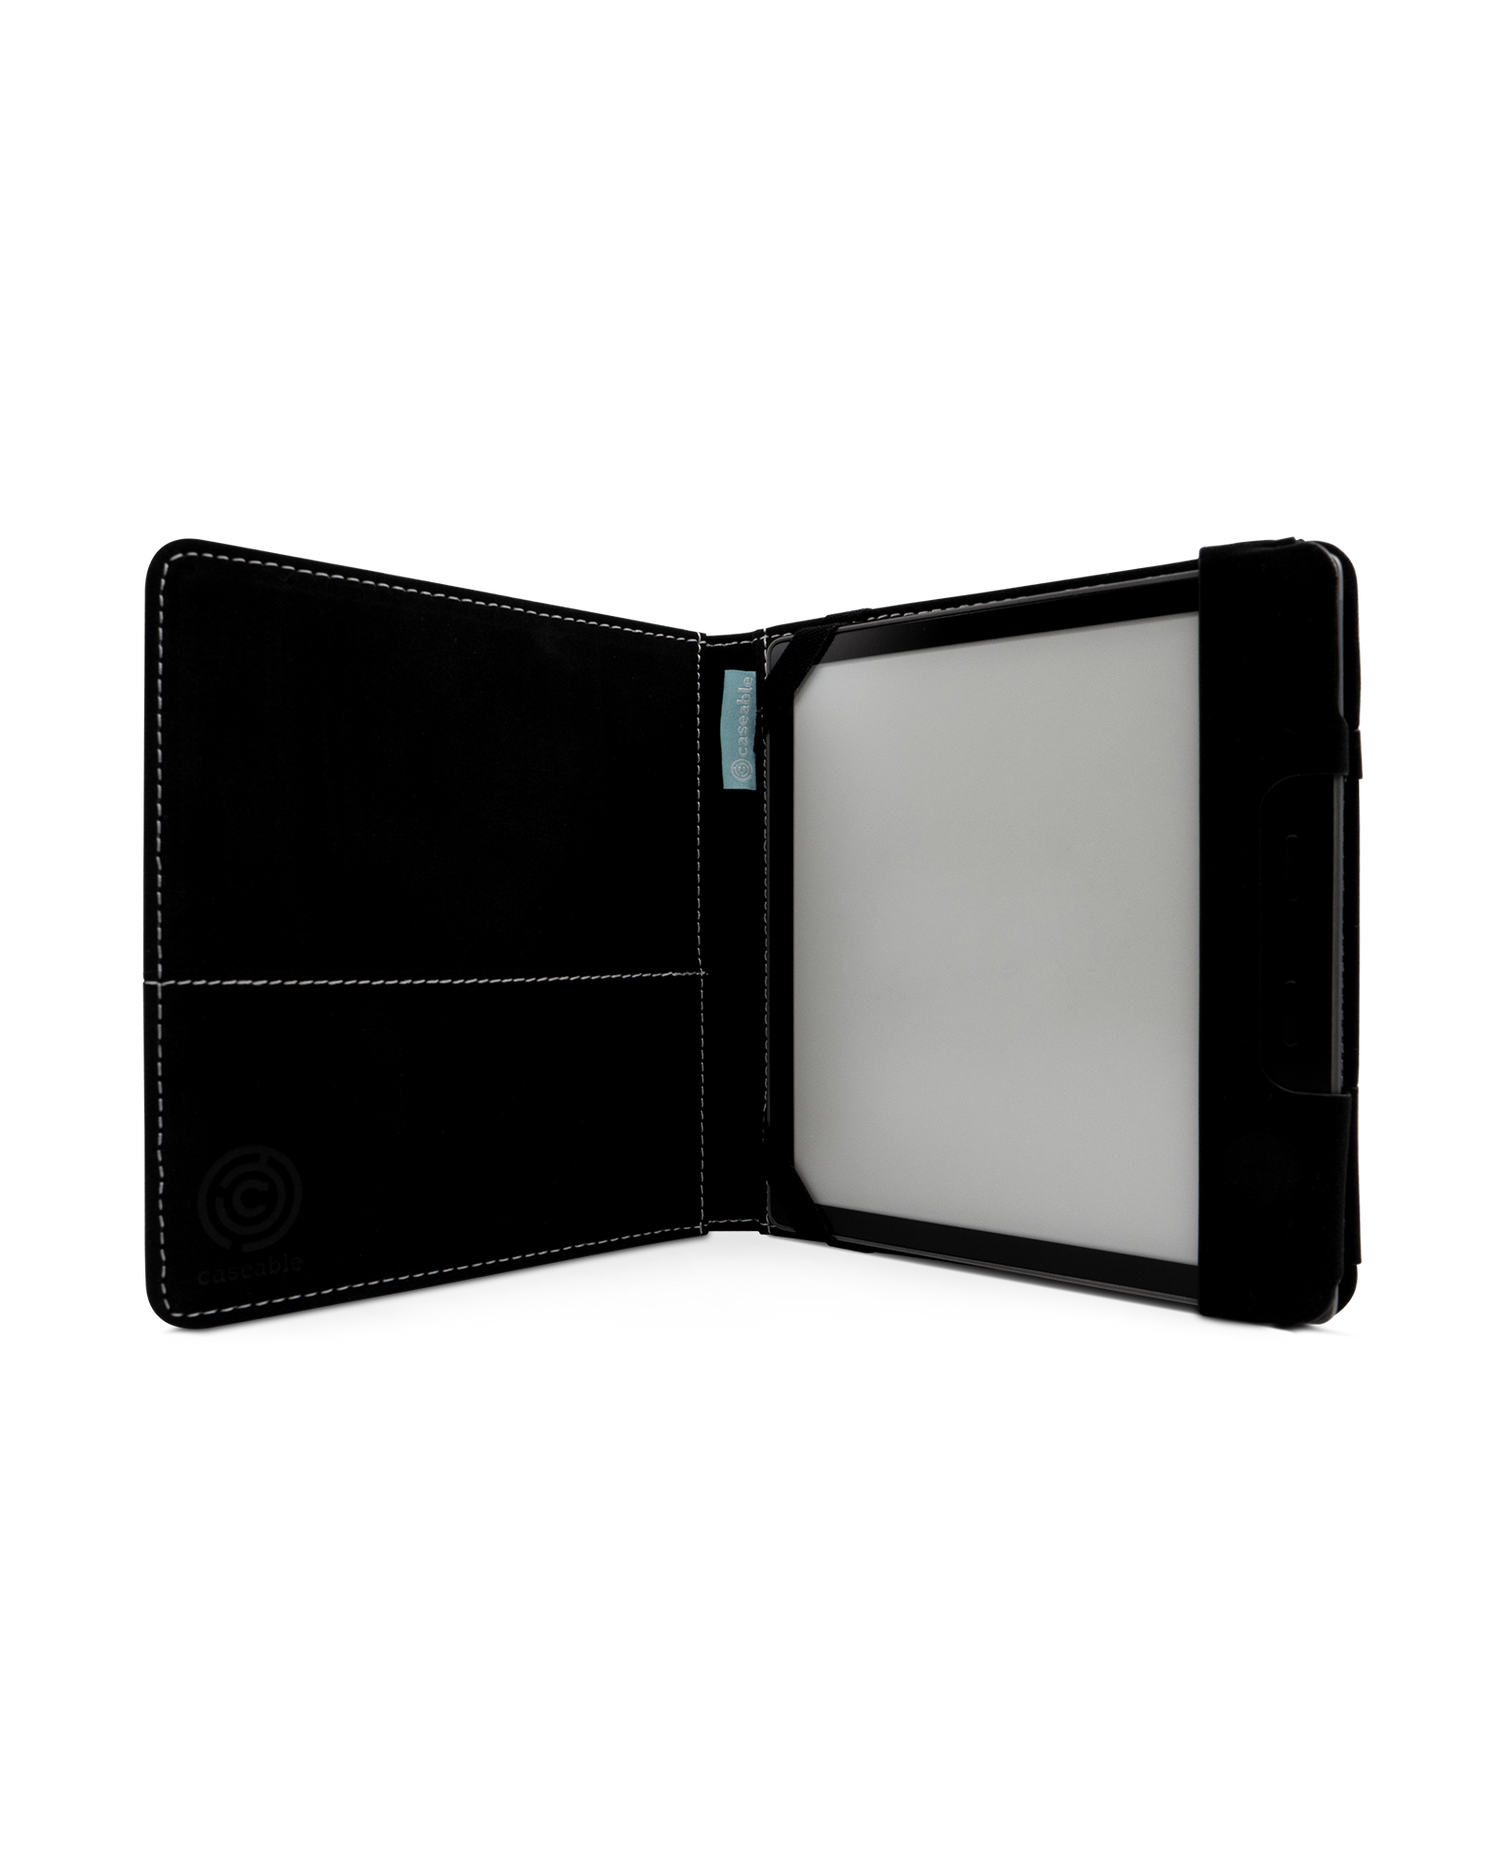 Cow Print eReader Case for tolino vision 6: Opened interior view